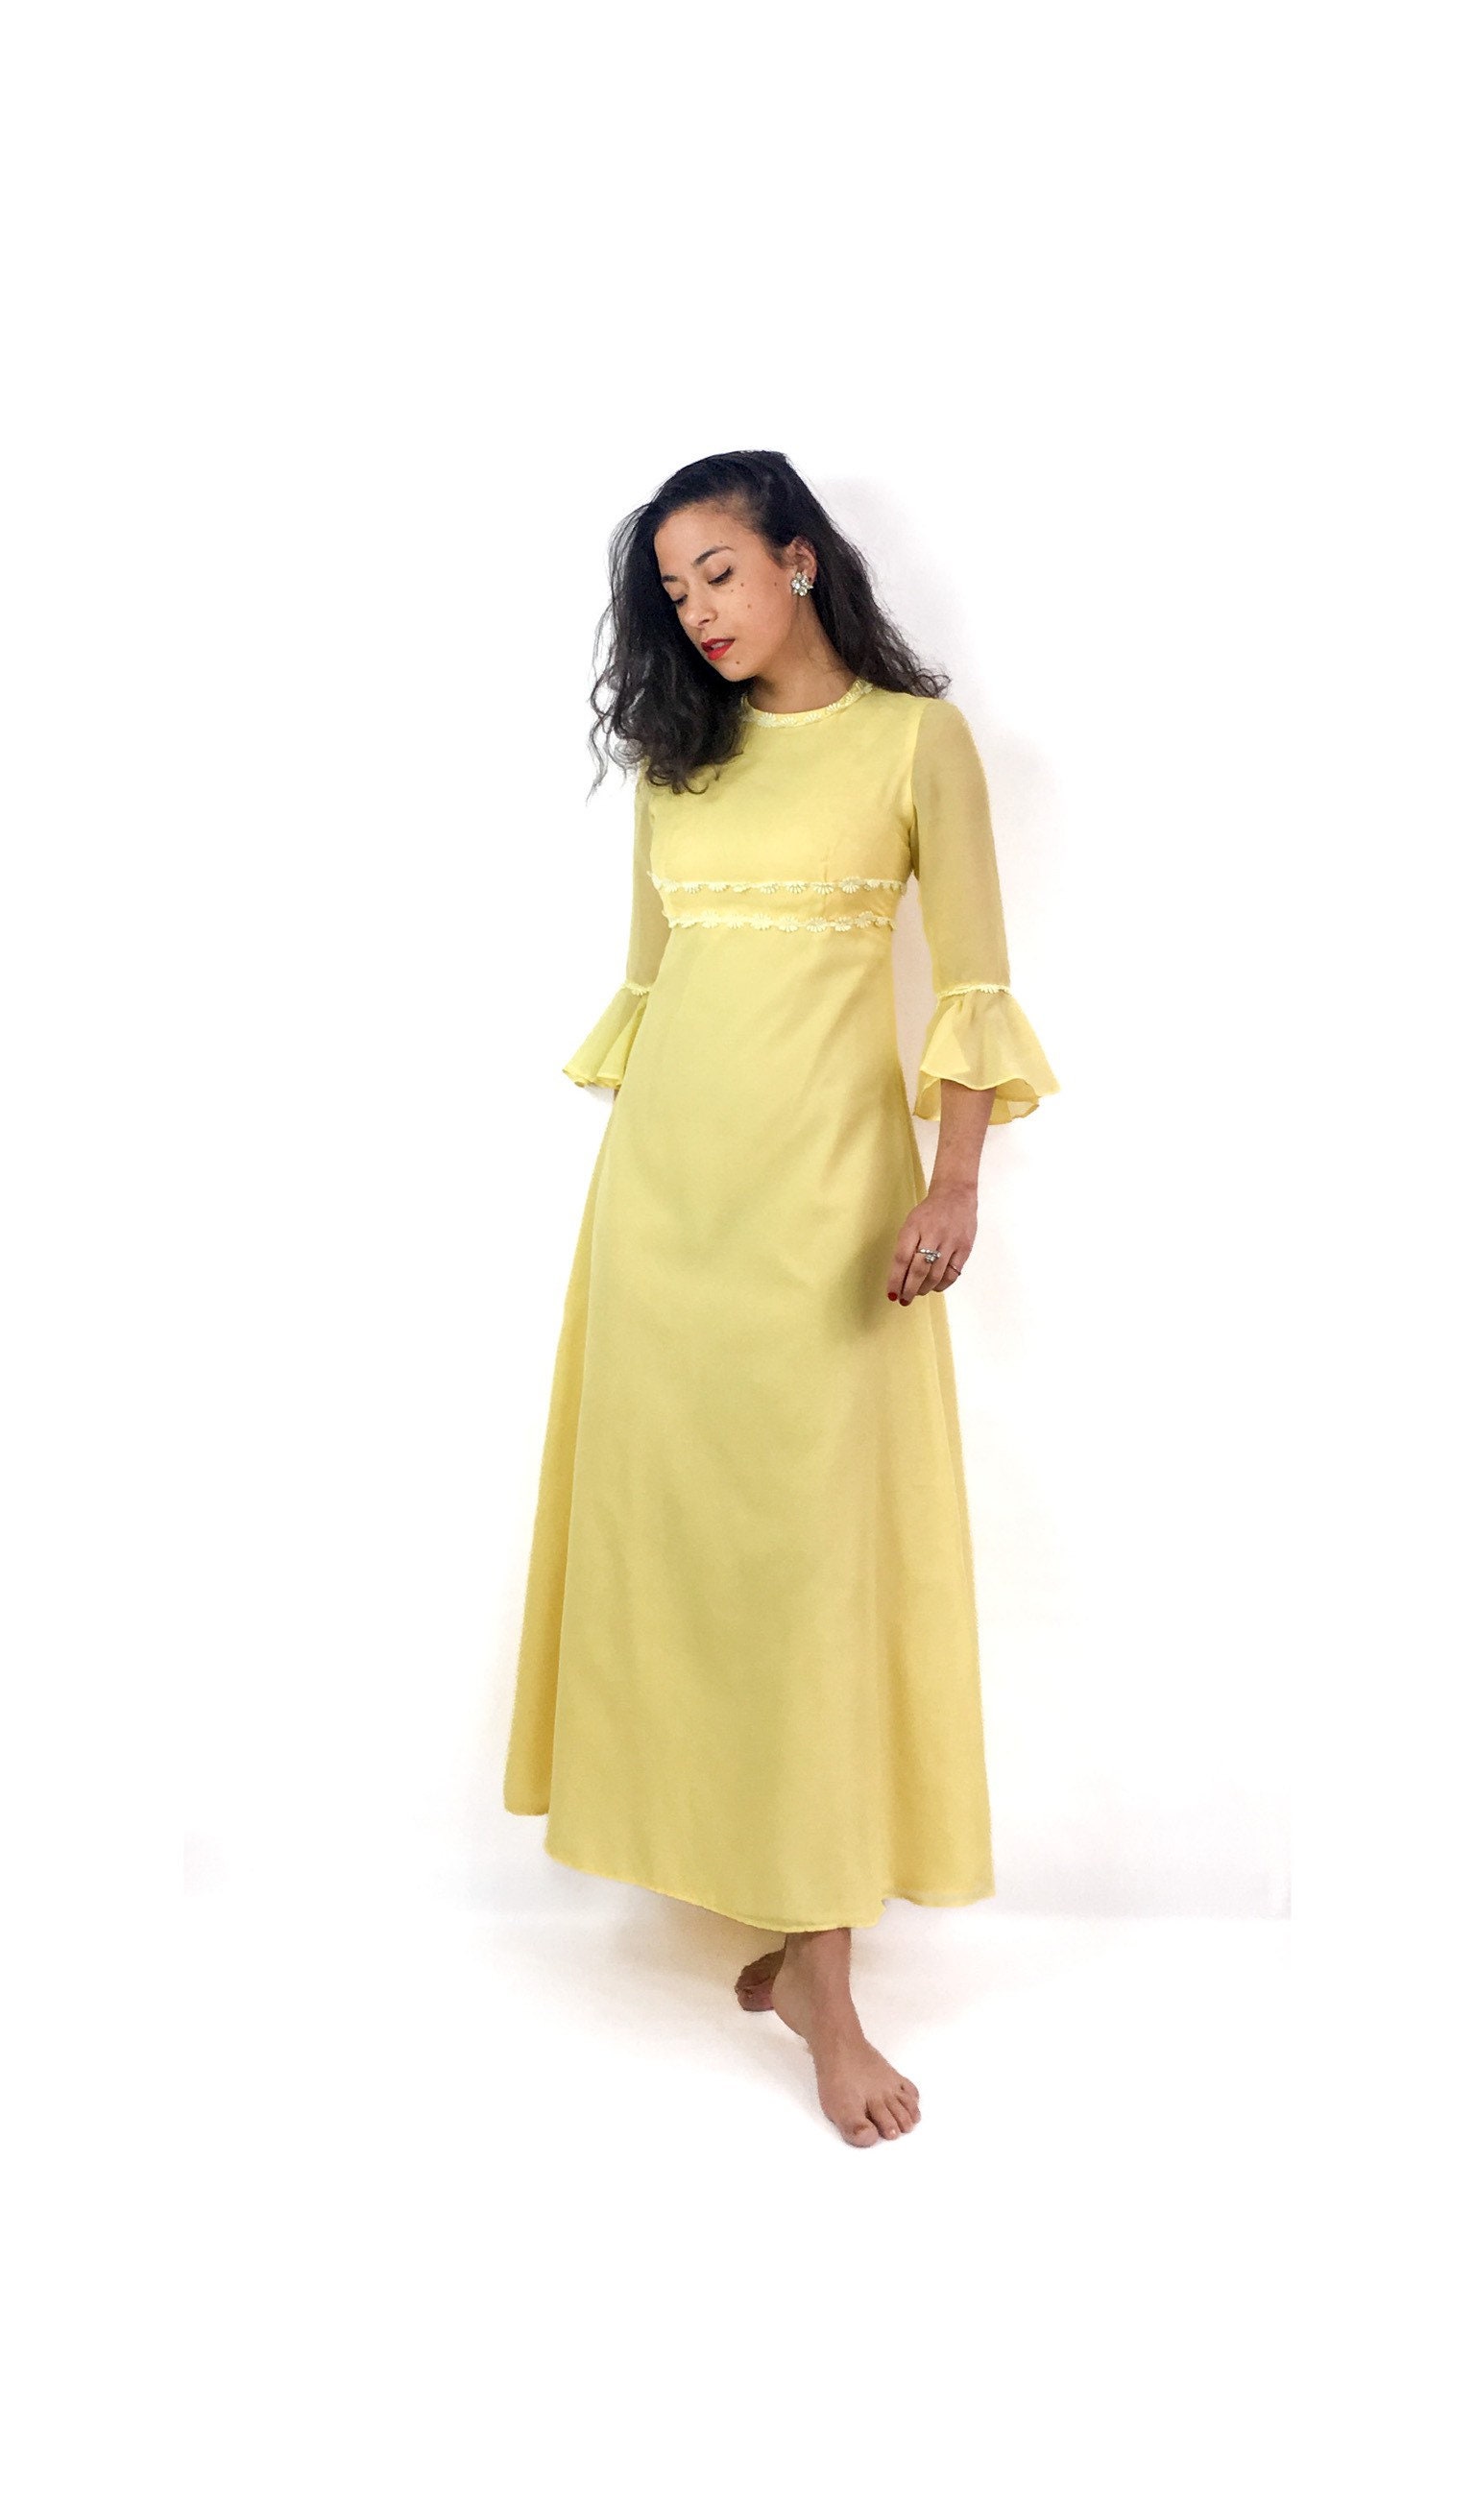 70s Vintage Formal Pale Yellow Maxi Dress. 3/4 Sheer Sleeves With